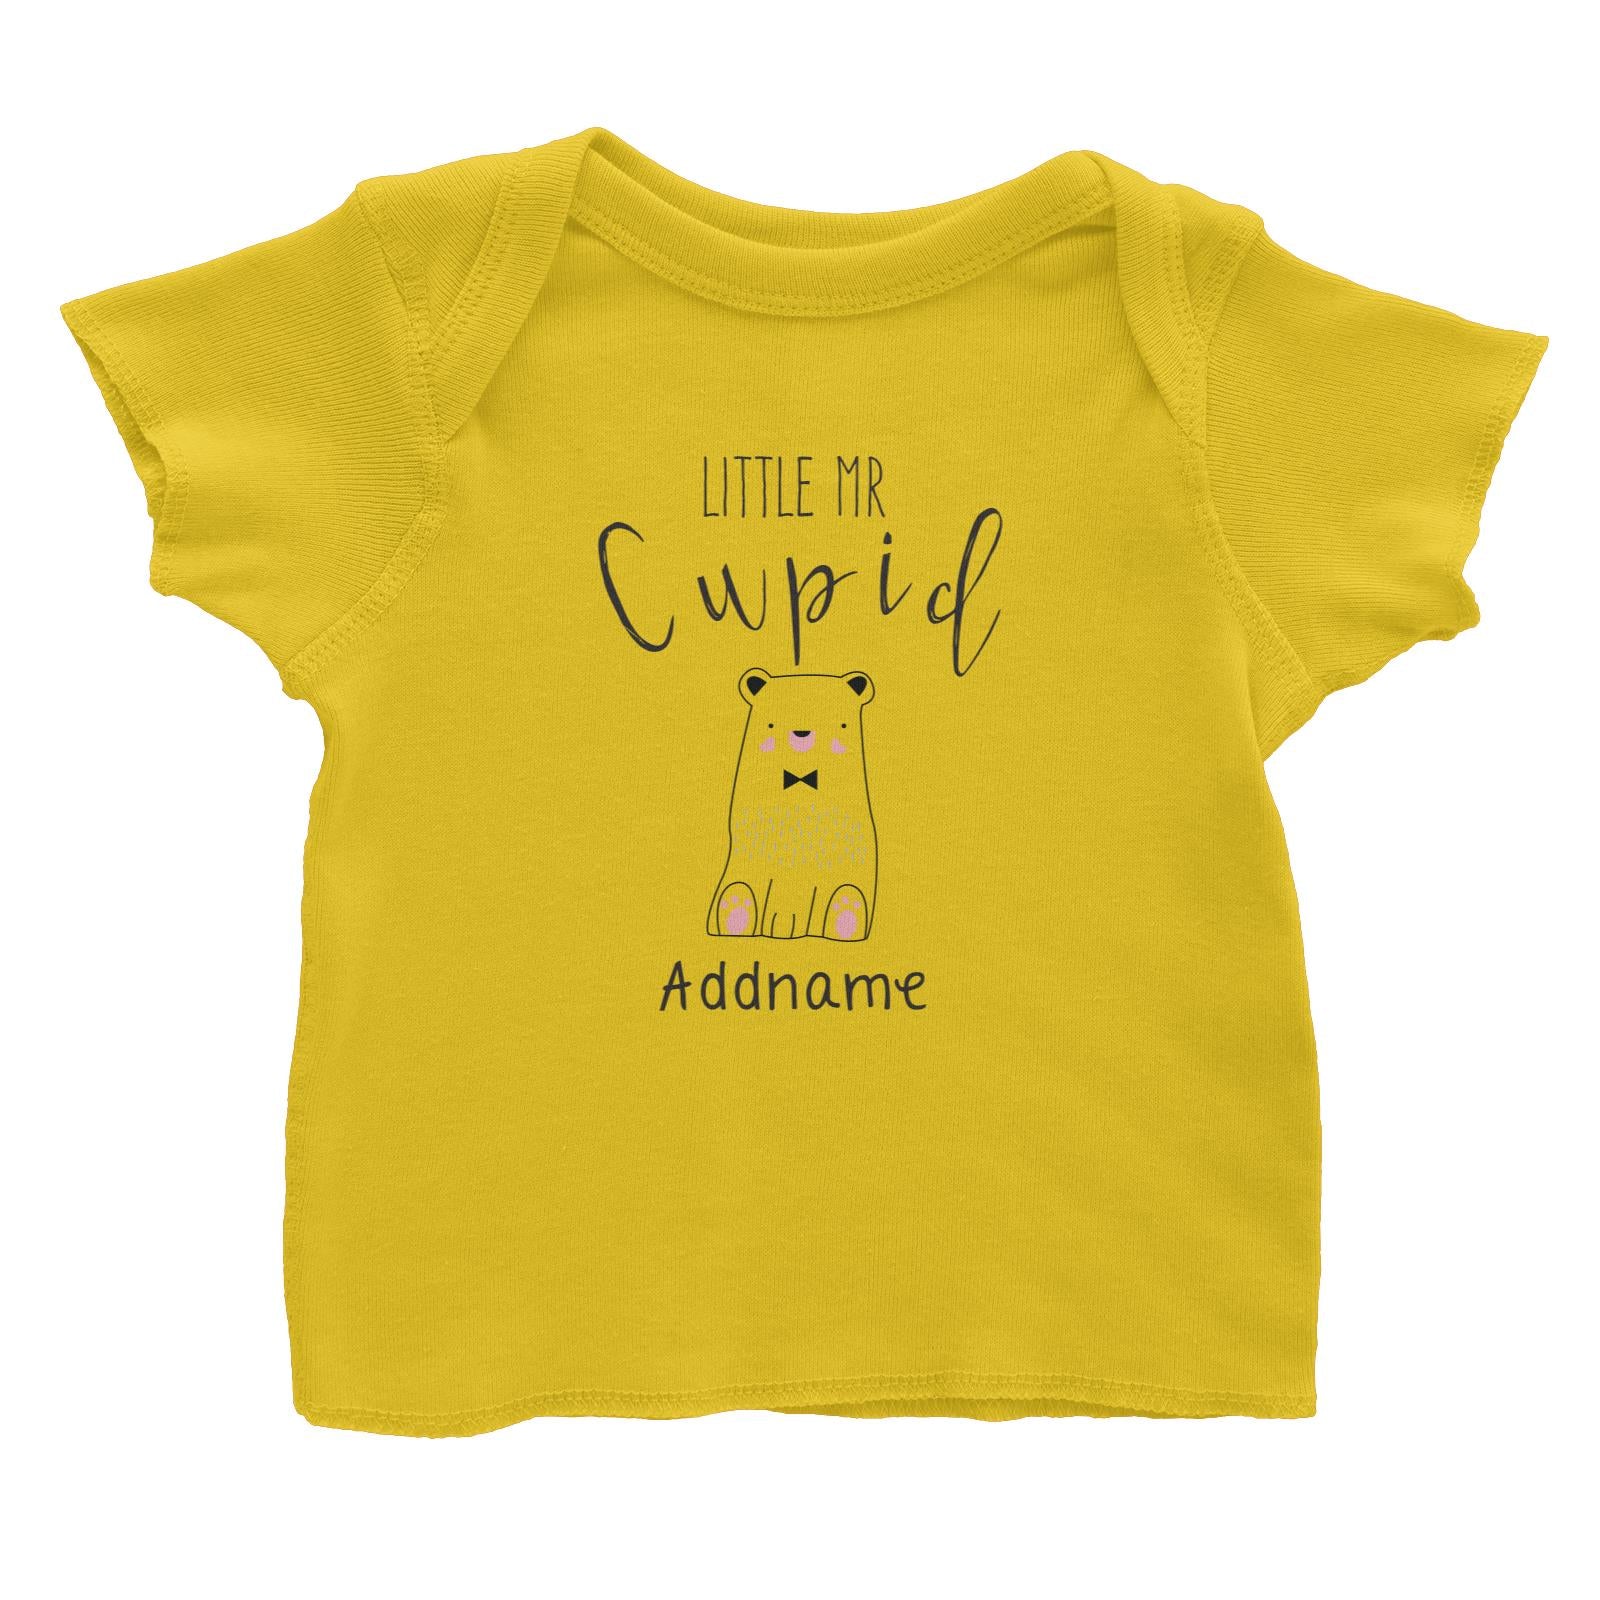 Cute Animals and Friends Series 2 Bear Little Mr Cupid Addname Baby T-Shirt